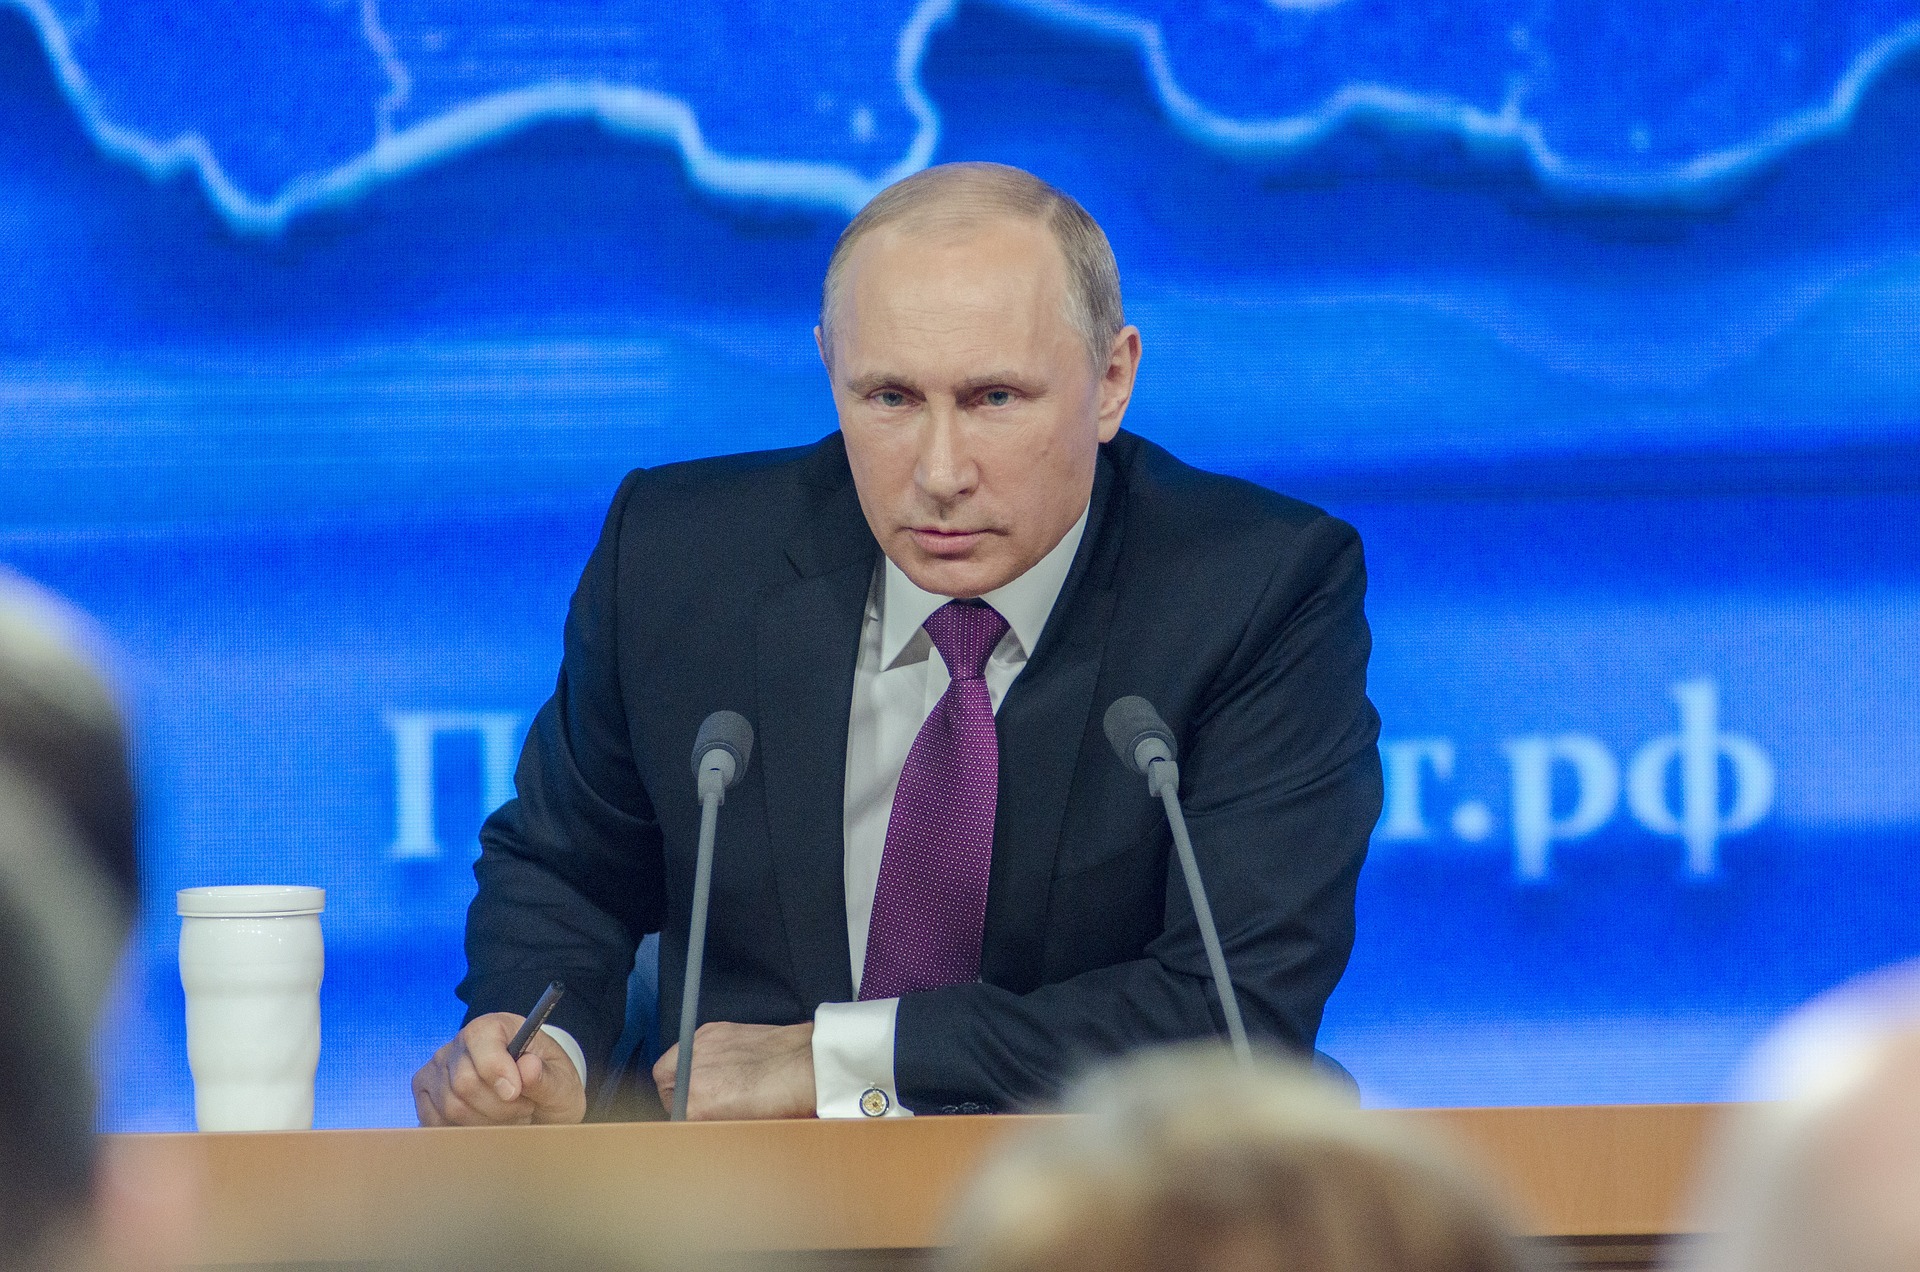 The Russian President said nukes were a deterrent, insisting Russia had not gone mad